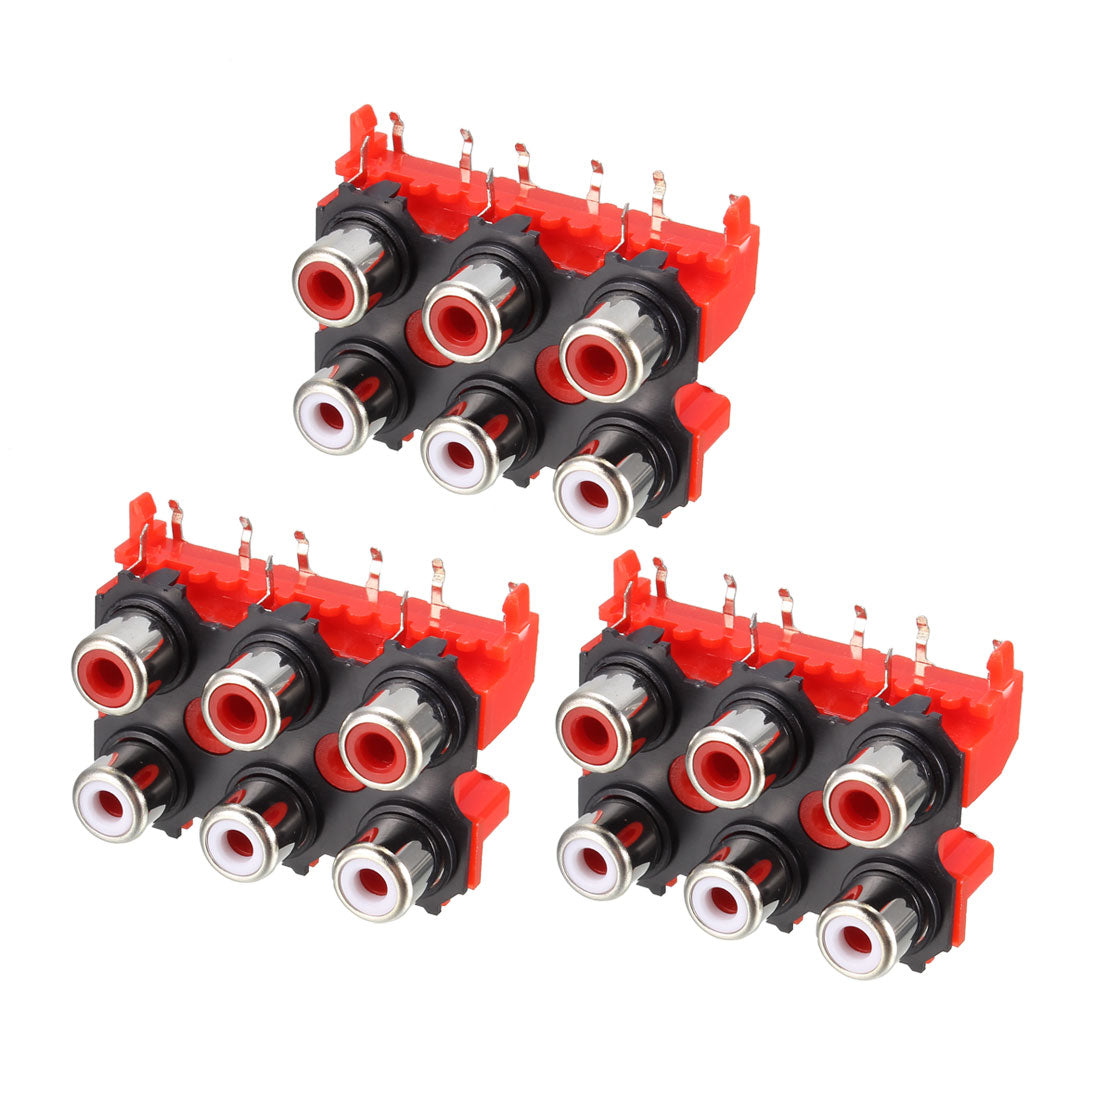 uxcell Uxcell PCB Panel Mount 6 RCA Socket Female Jack Audio Video AV Connector Red 9pins 3Pcs